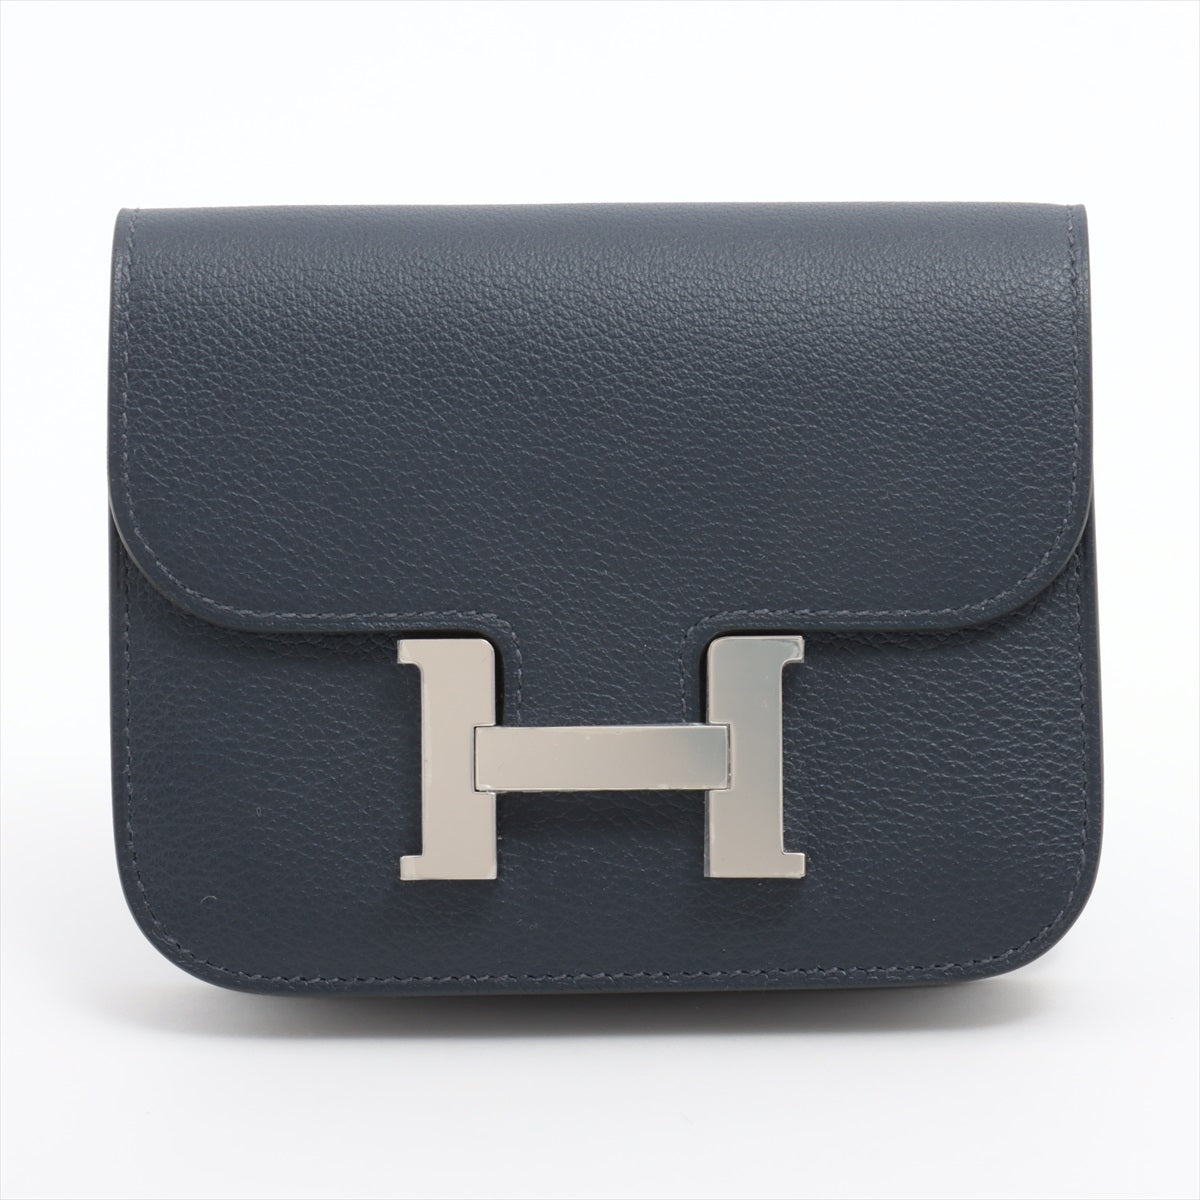 Hermès Constance Slim Ever color Compact Wallet Navy blue Silver Metal fittings B: 2023